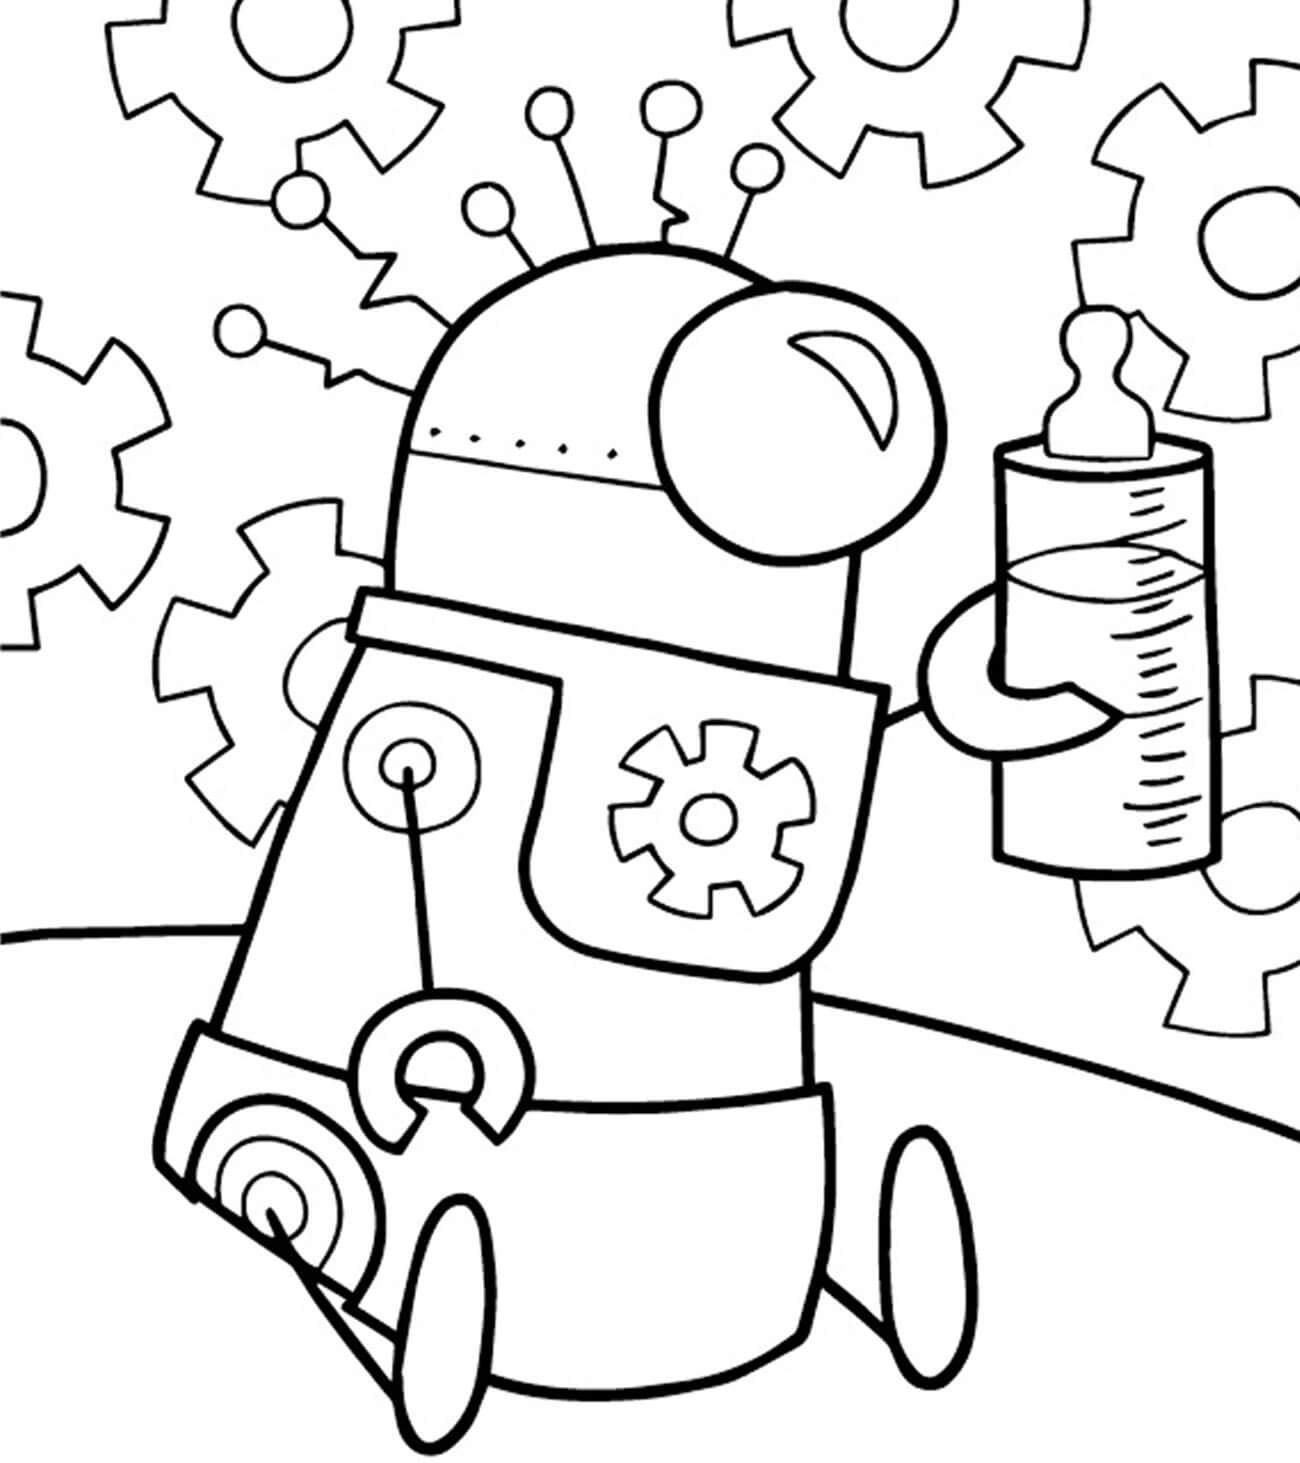 lego-robot-coloring-page-free-printable-coloring-pages-for-kids